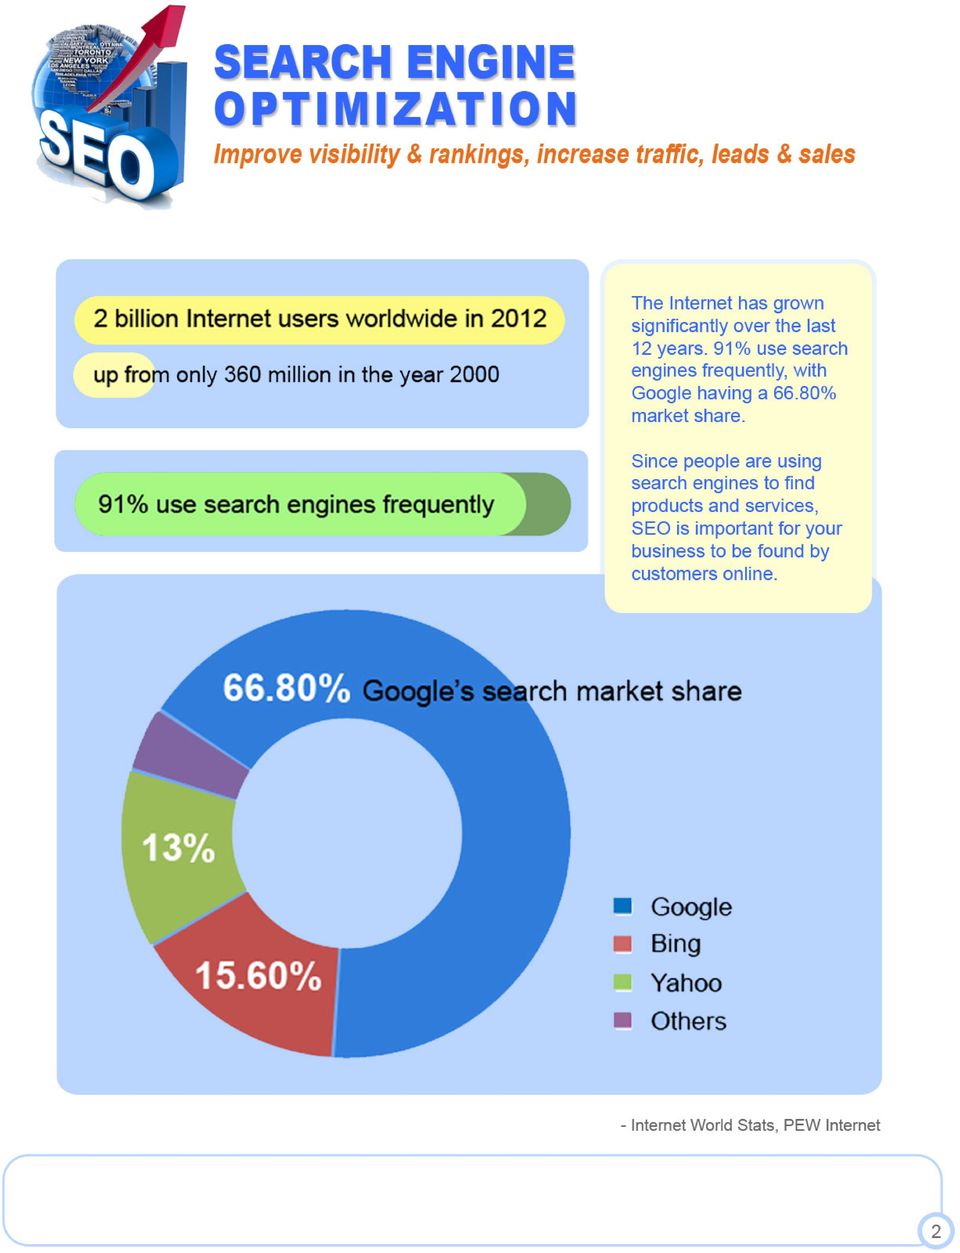 91 % use search engines frequently, with Google having a 66.800/0 market share.